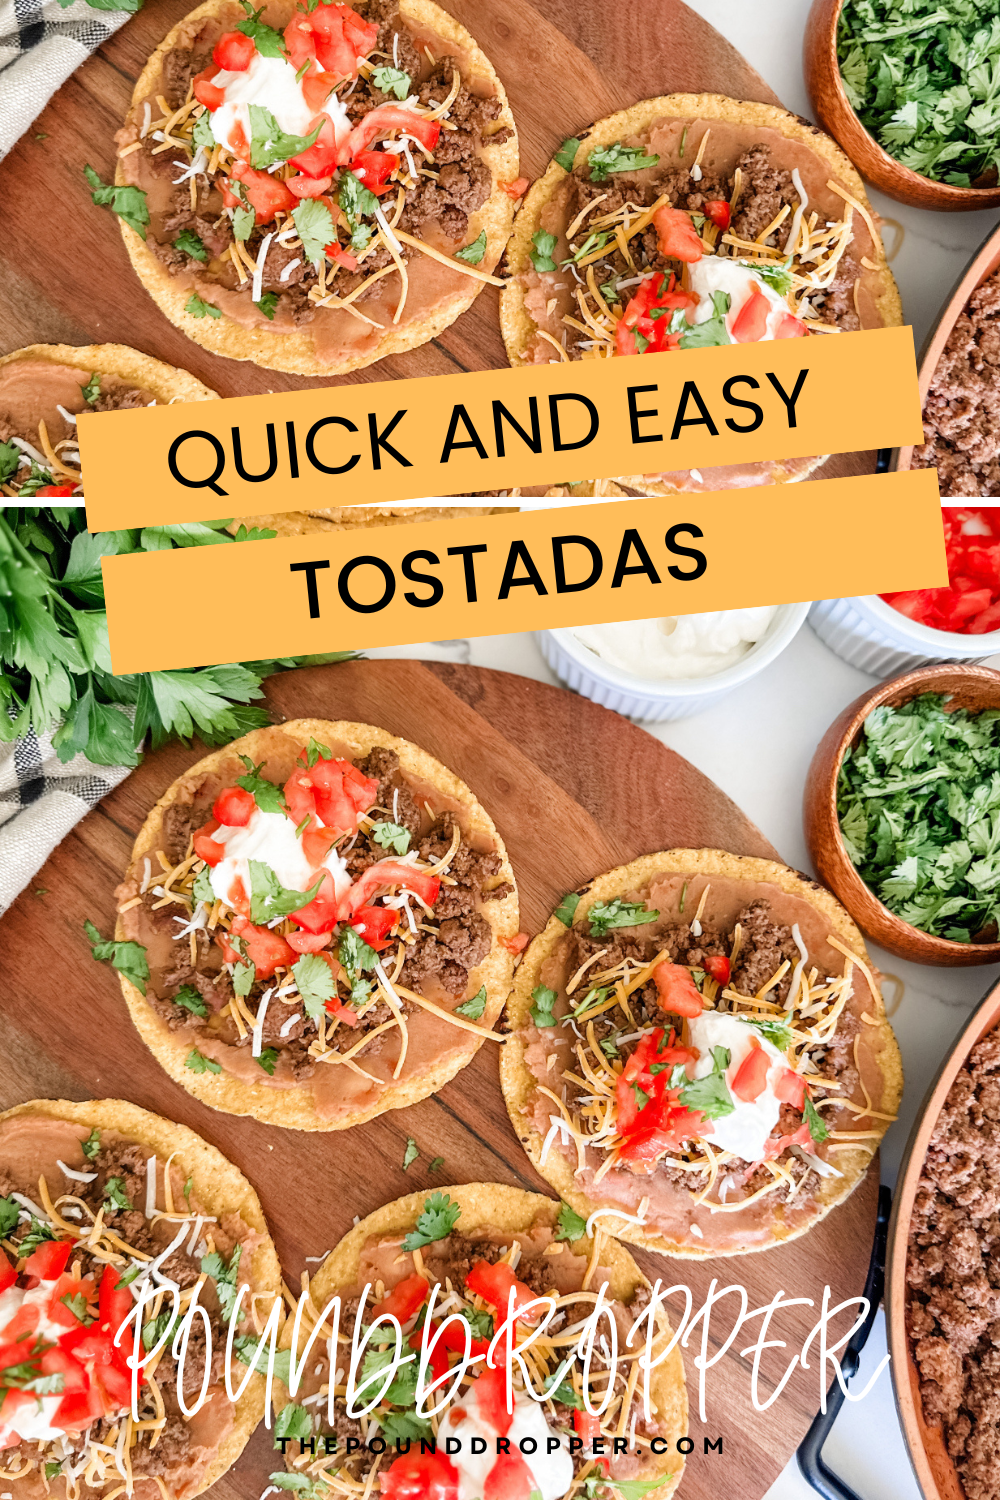 These Tostadas are just so quick and easy to make! These tostadas are made with crispy corn tortilla shells, lean ground beef, fat free refried beans, cheese, and topped with your favorite toppings! Enjoy for an easy weeknight meal or for make for an entire crowd! via @pounddropper